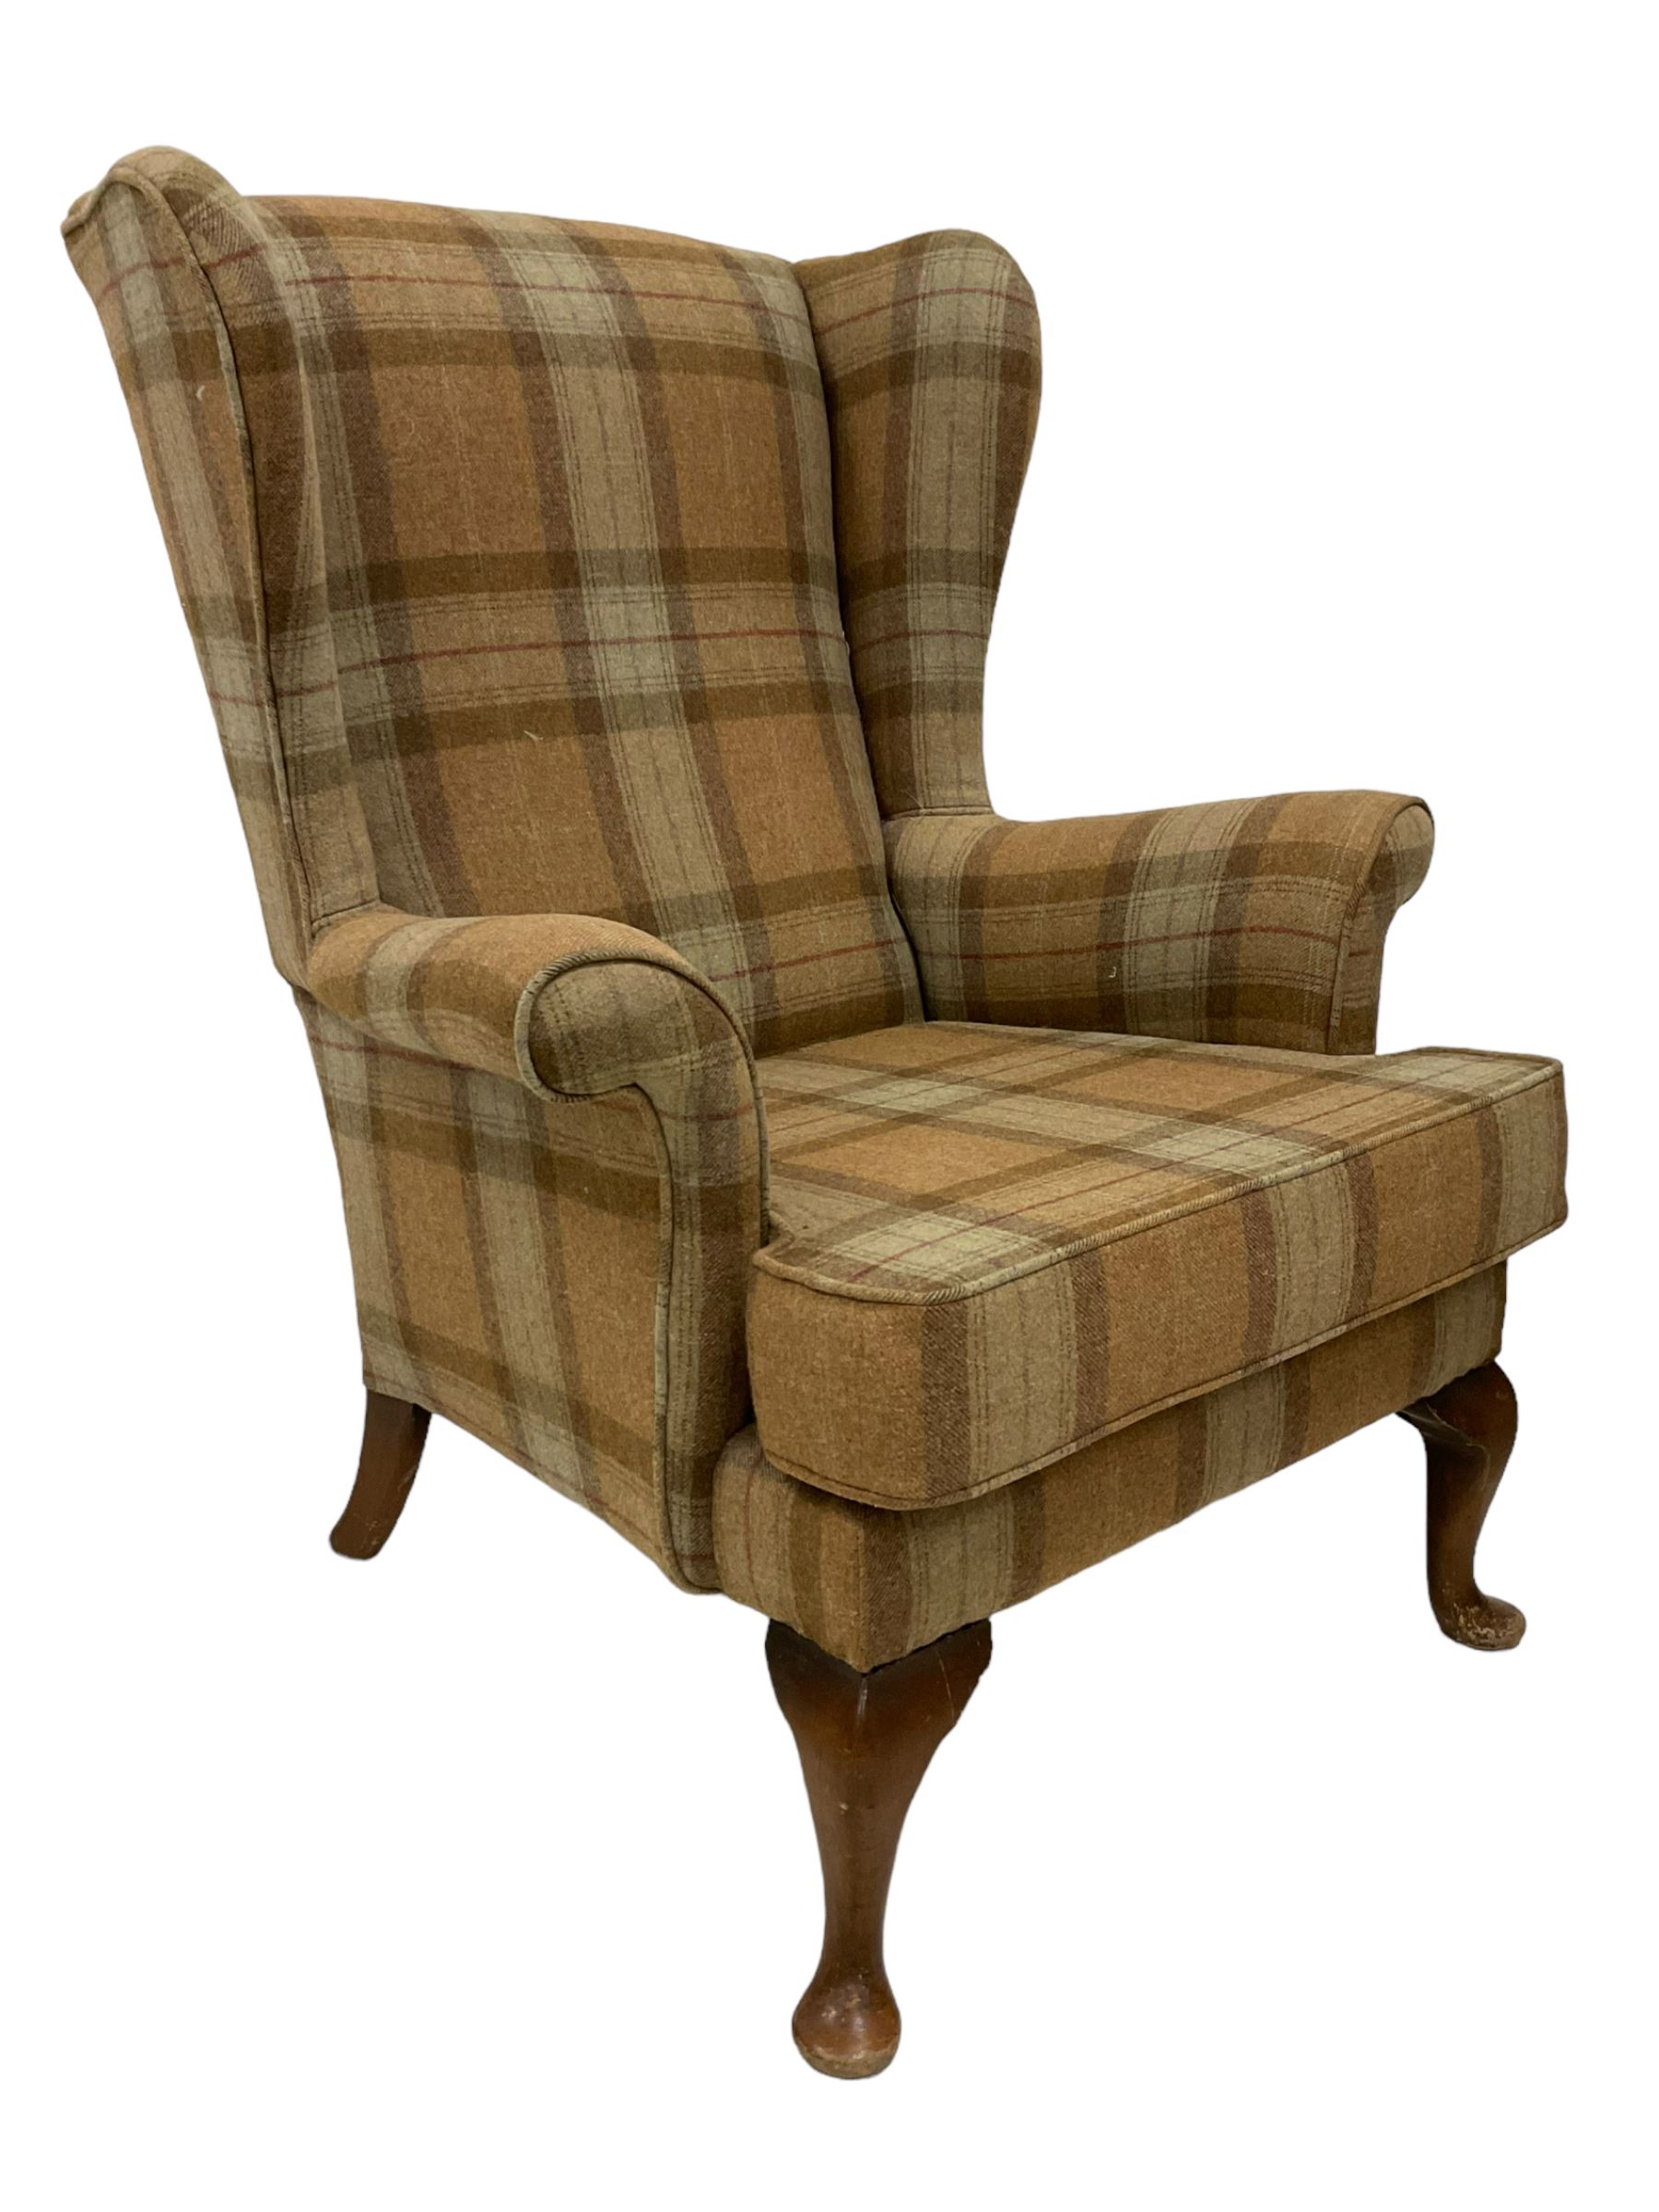 Parker Knoll - pair of Georgian design hardwood framed wingback armchairs - Image 2 of 4